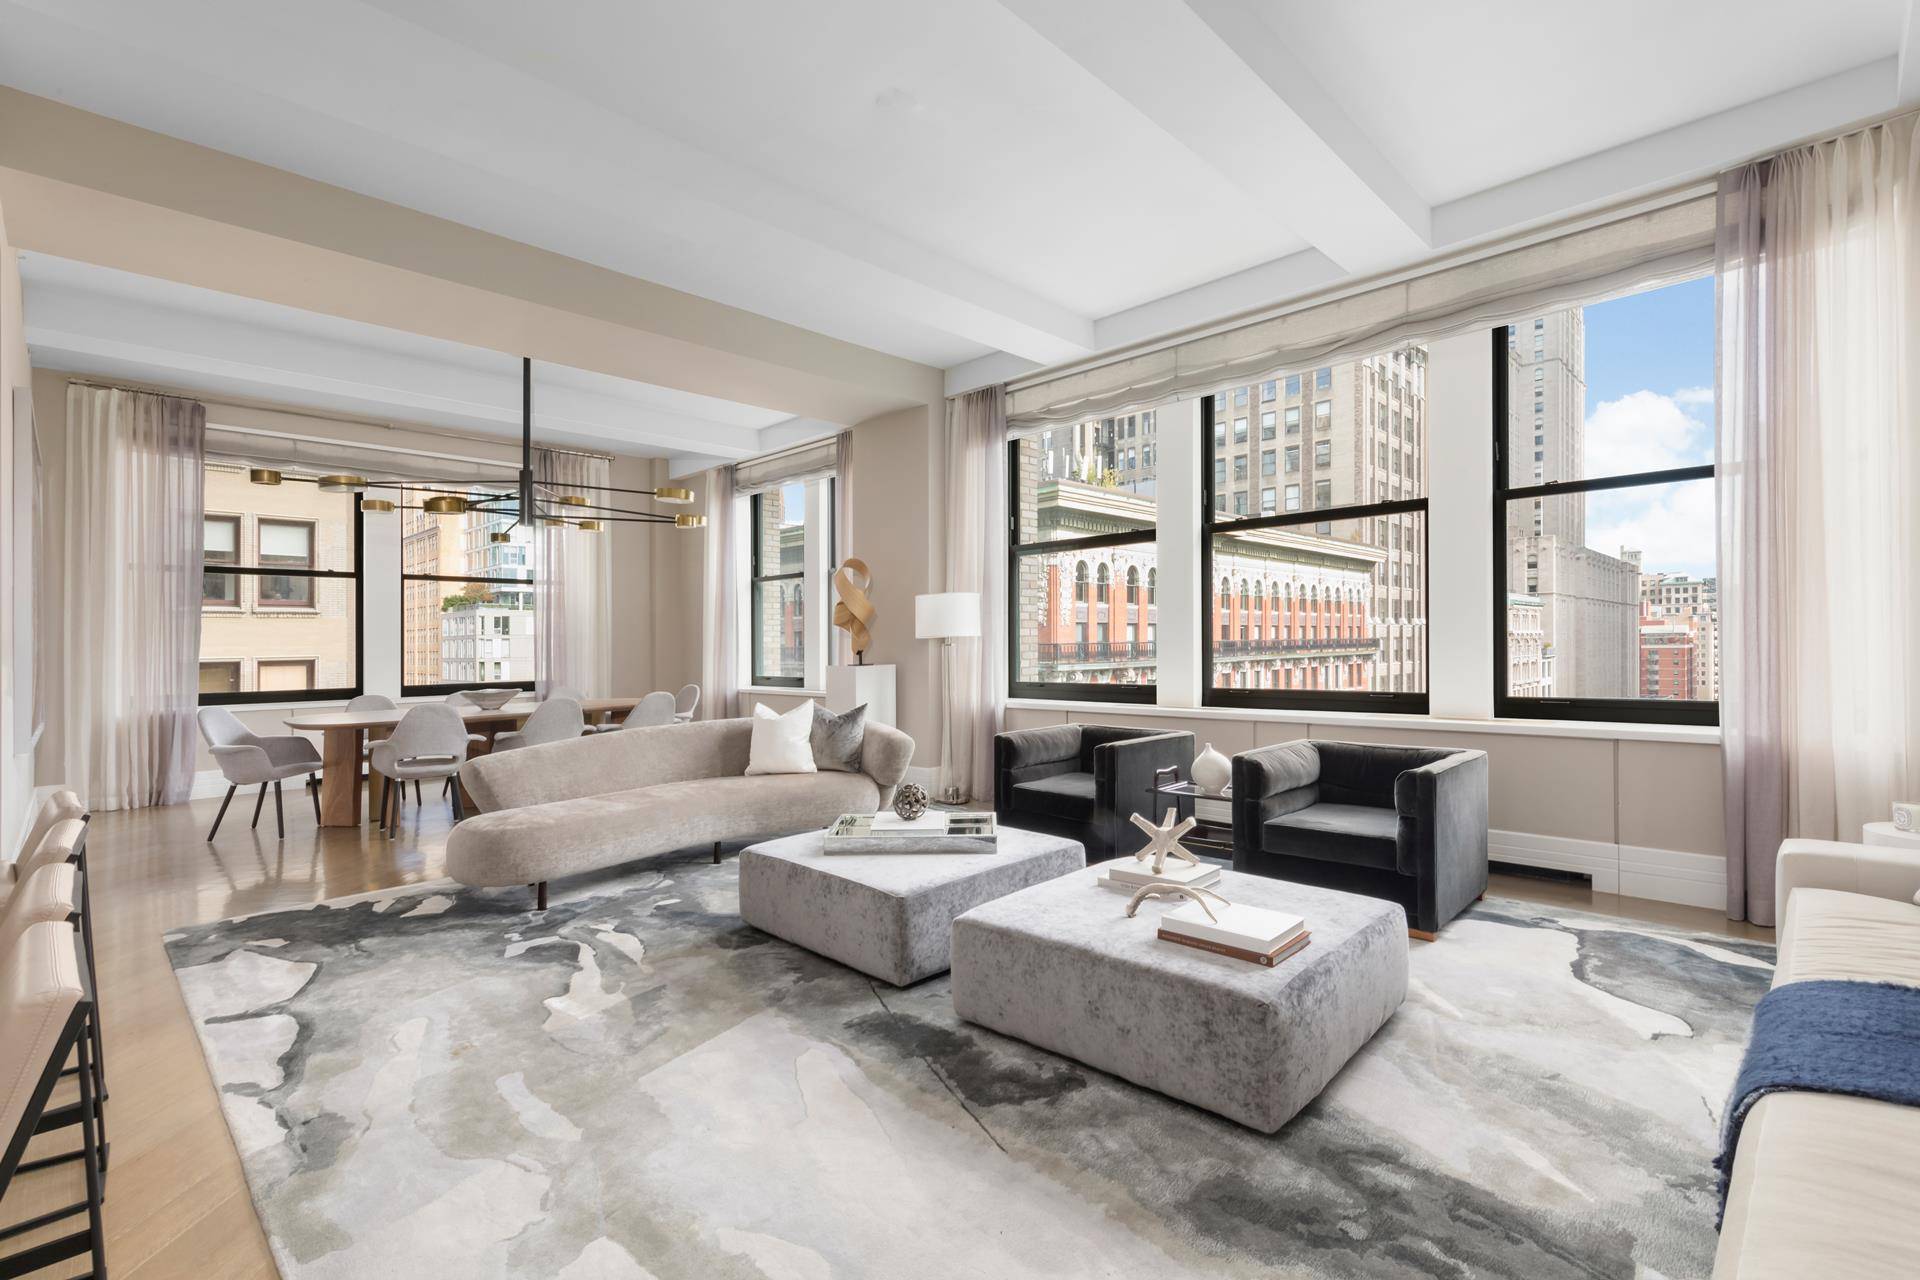 Perfectly located on the 11th floor and offering gorgeous views of Madison Square Park, this stunning 3 bedroom, 3.